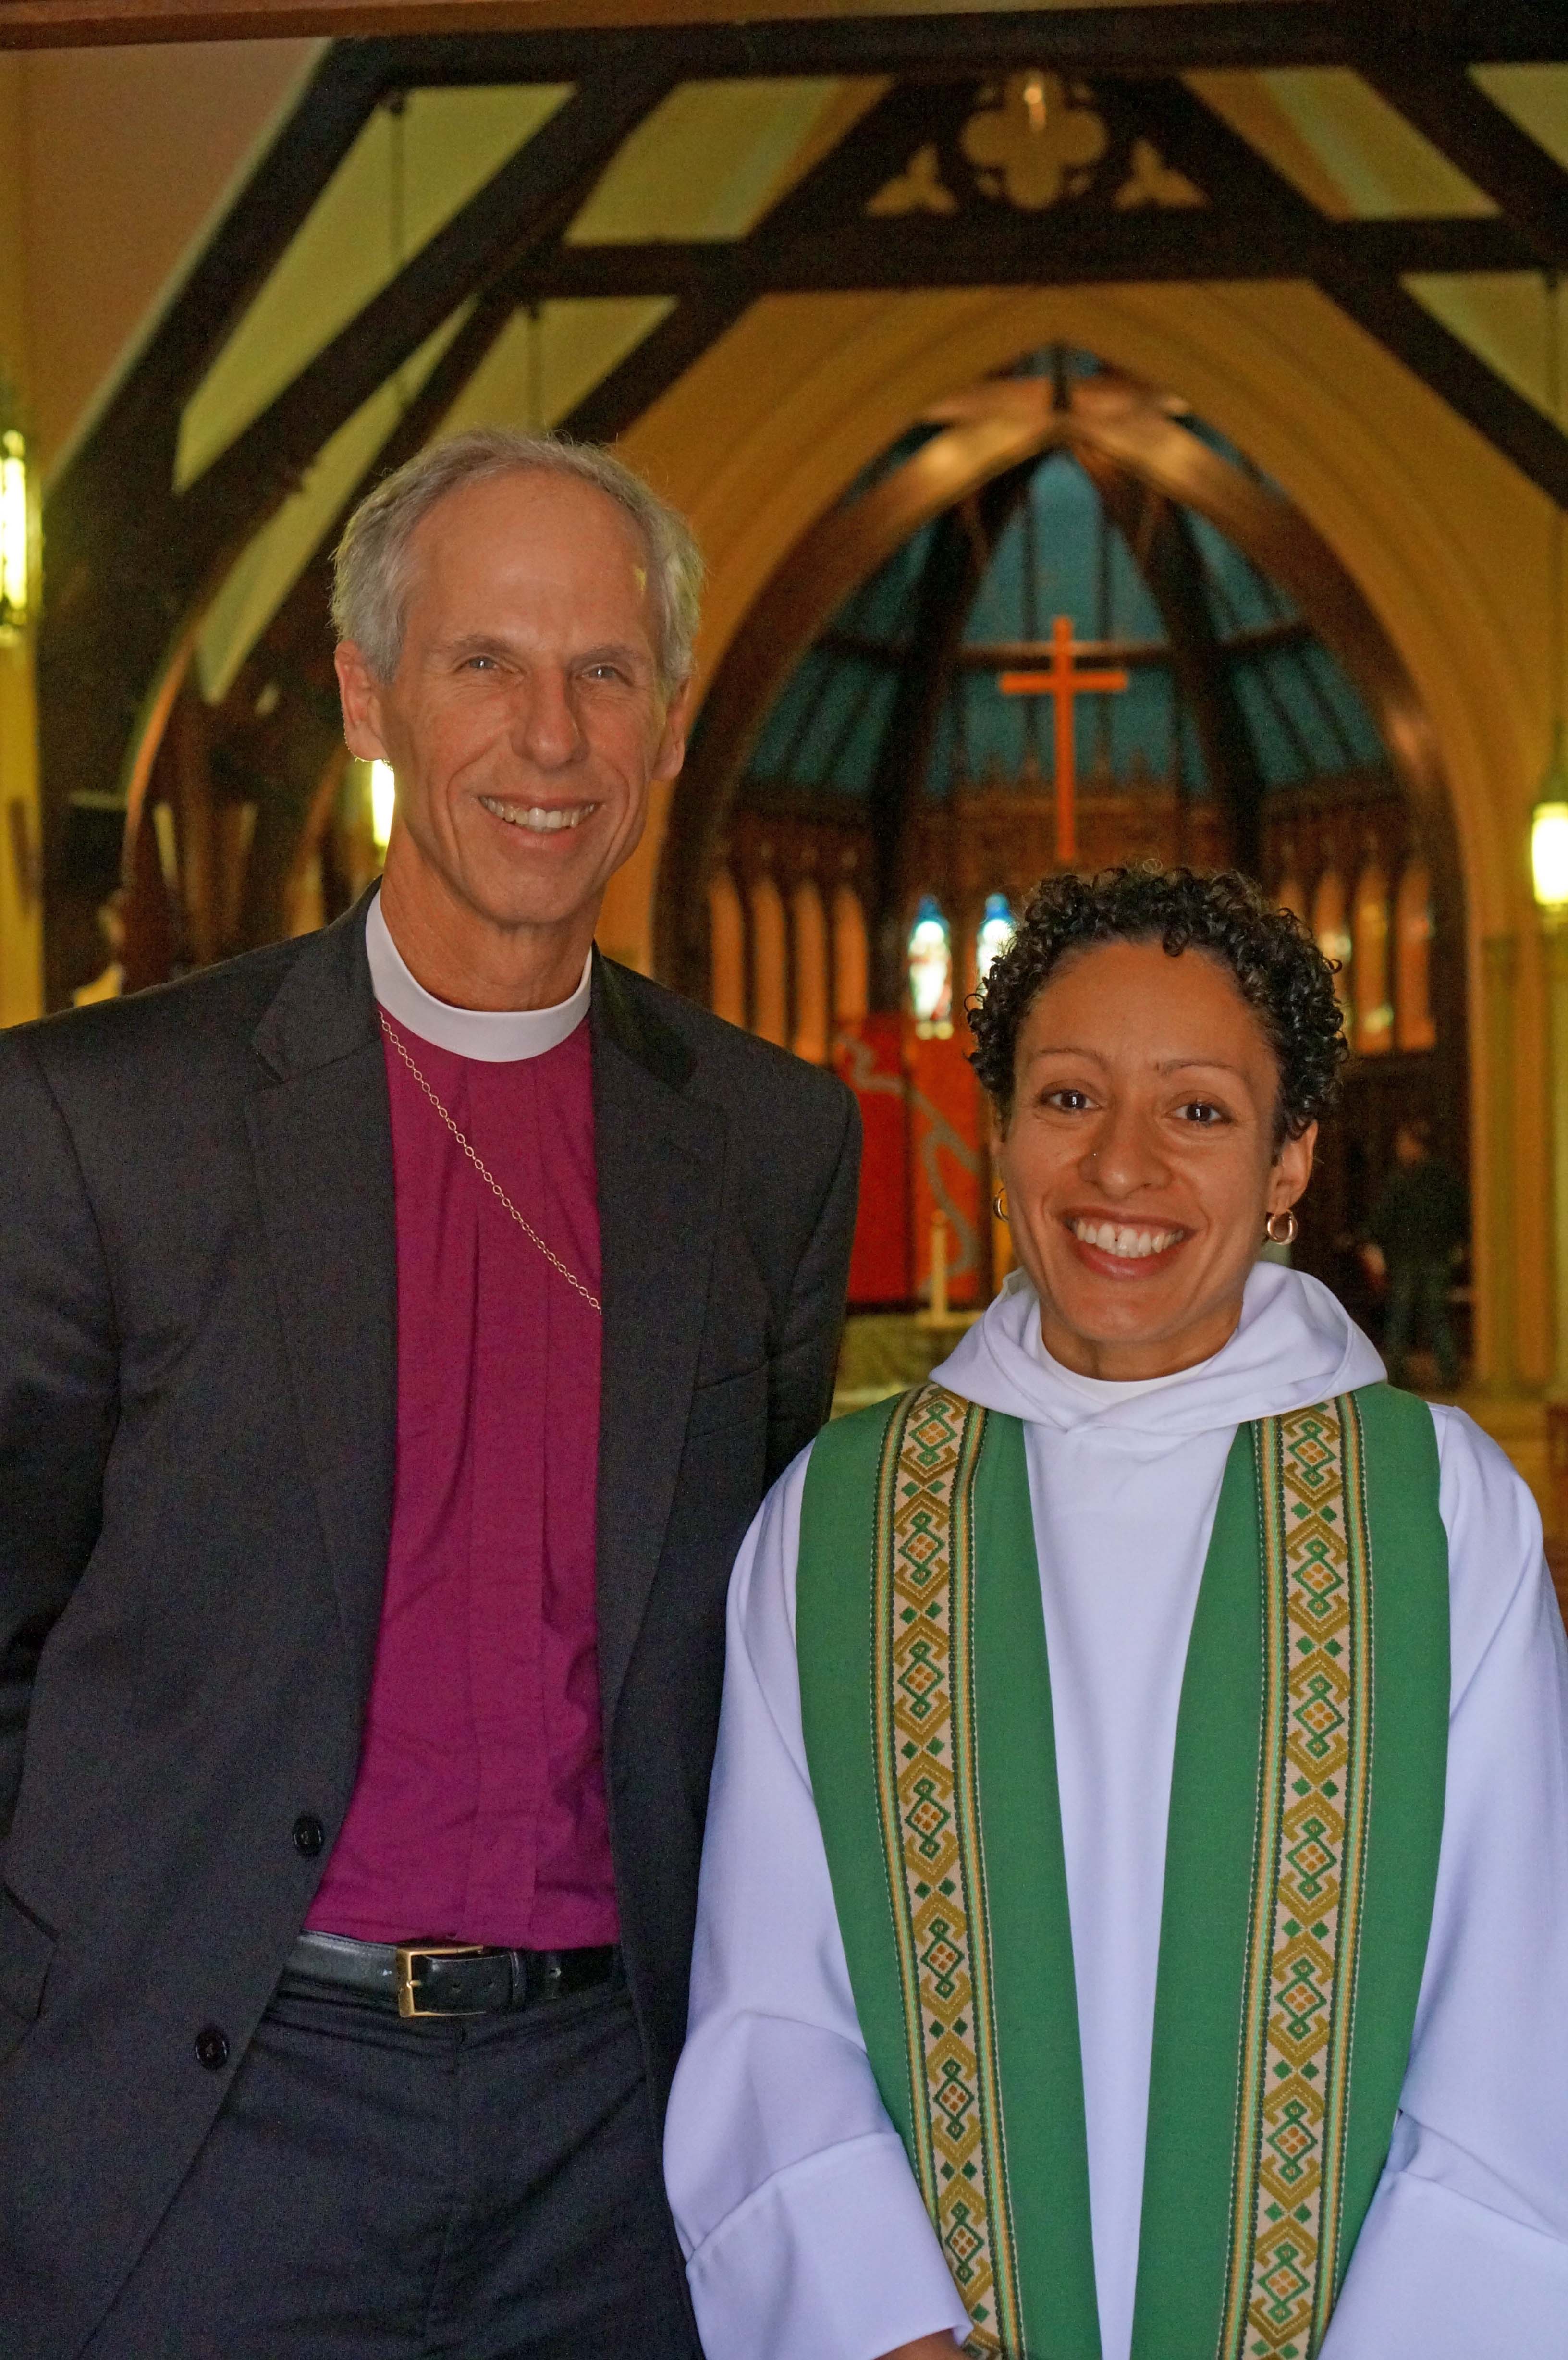 Bishop Fisher and Rev Dr Fortuna